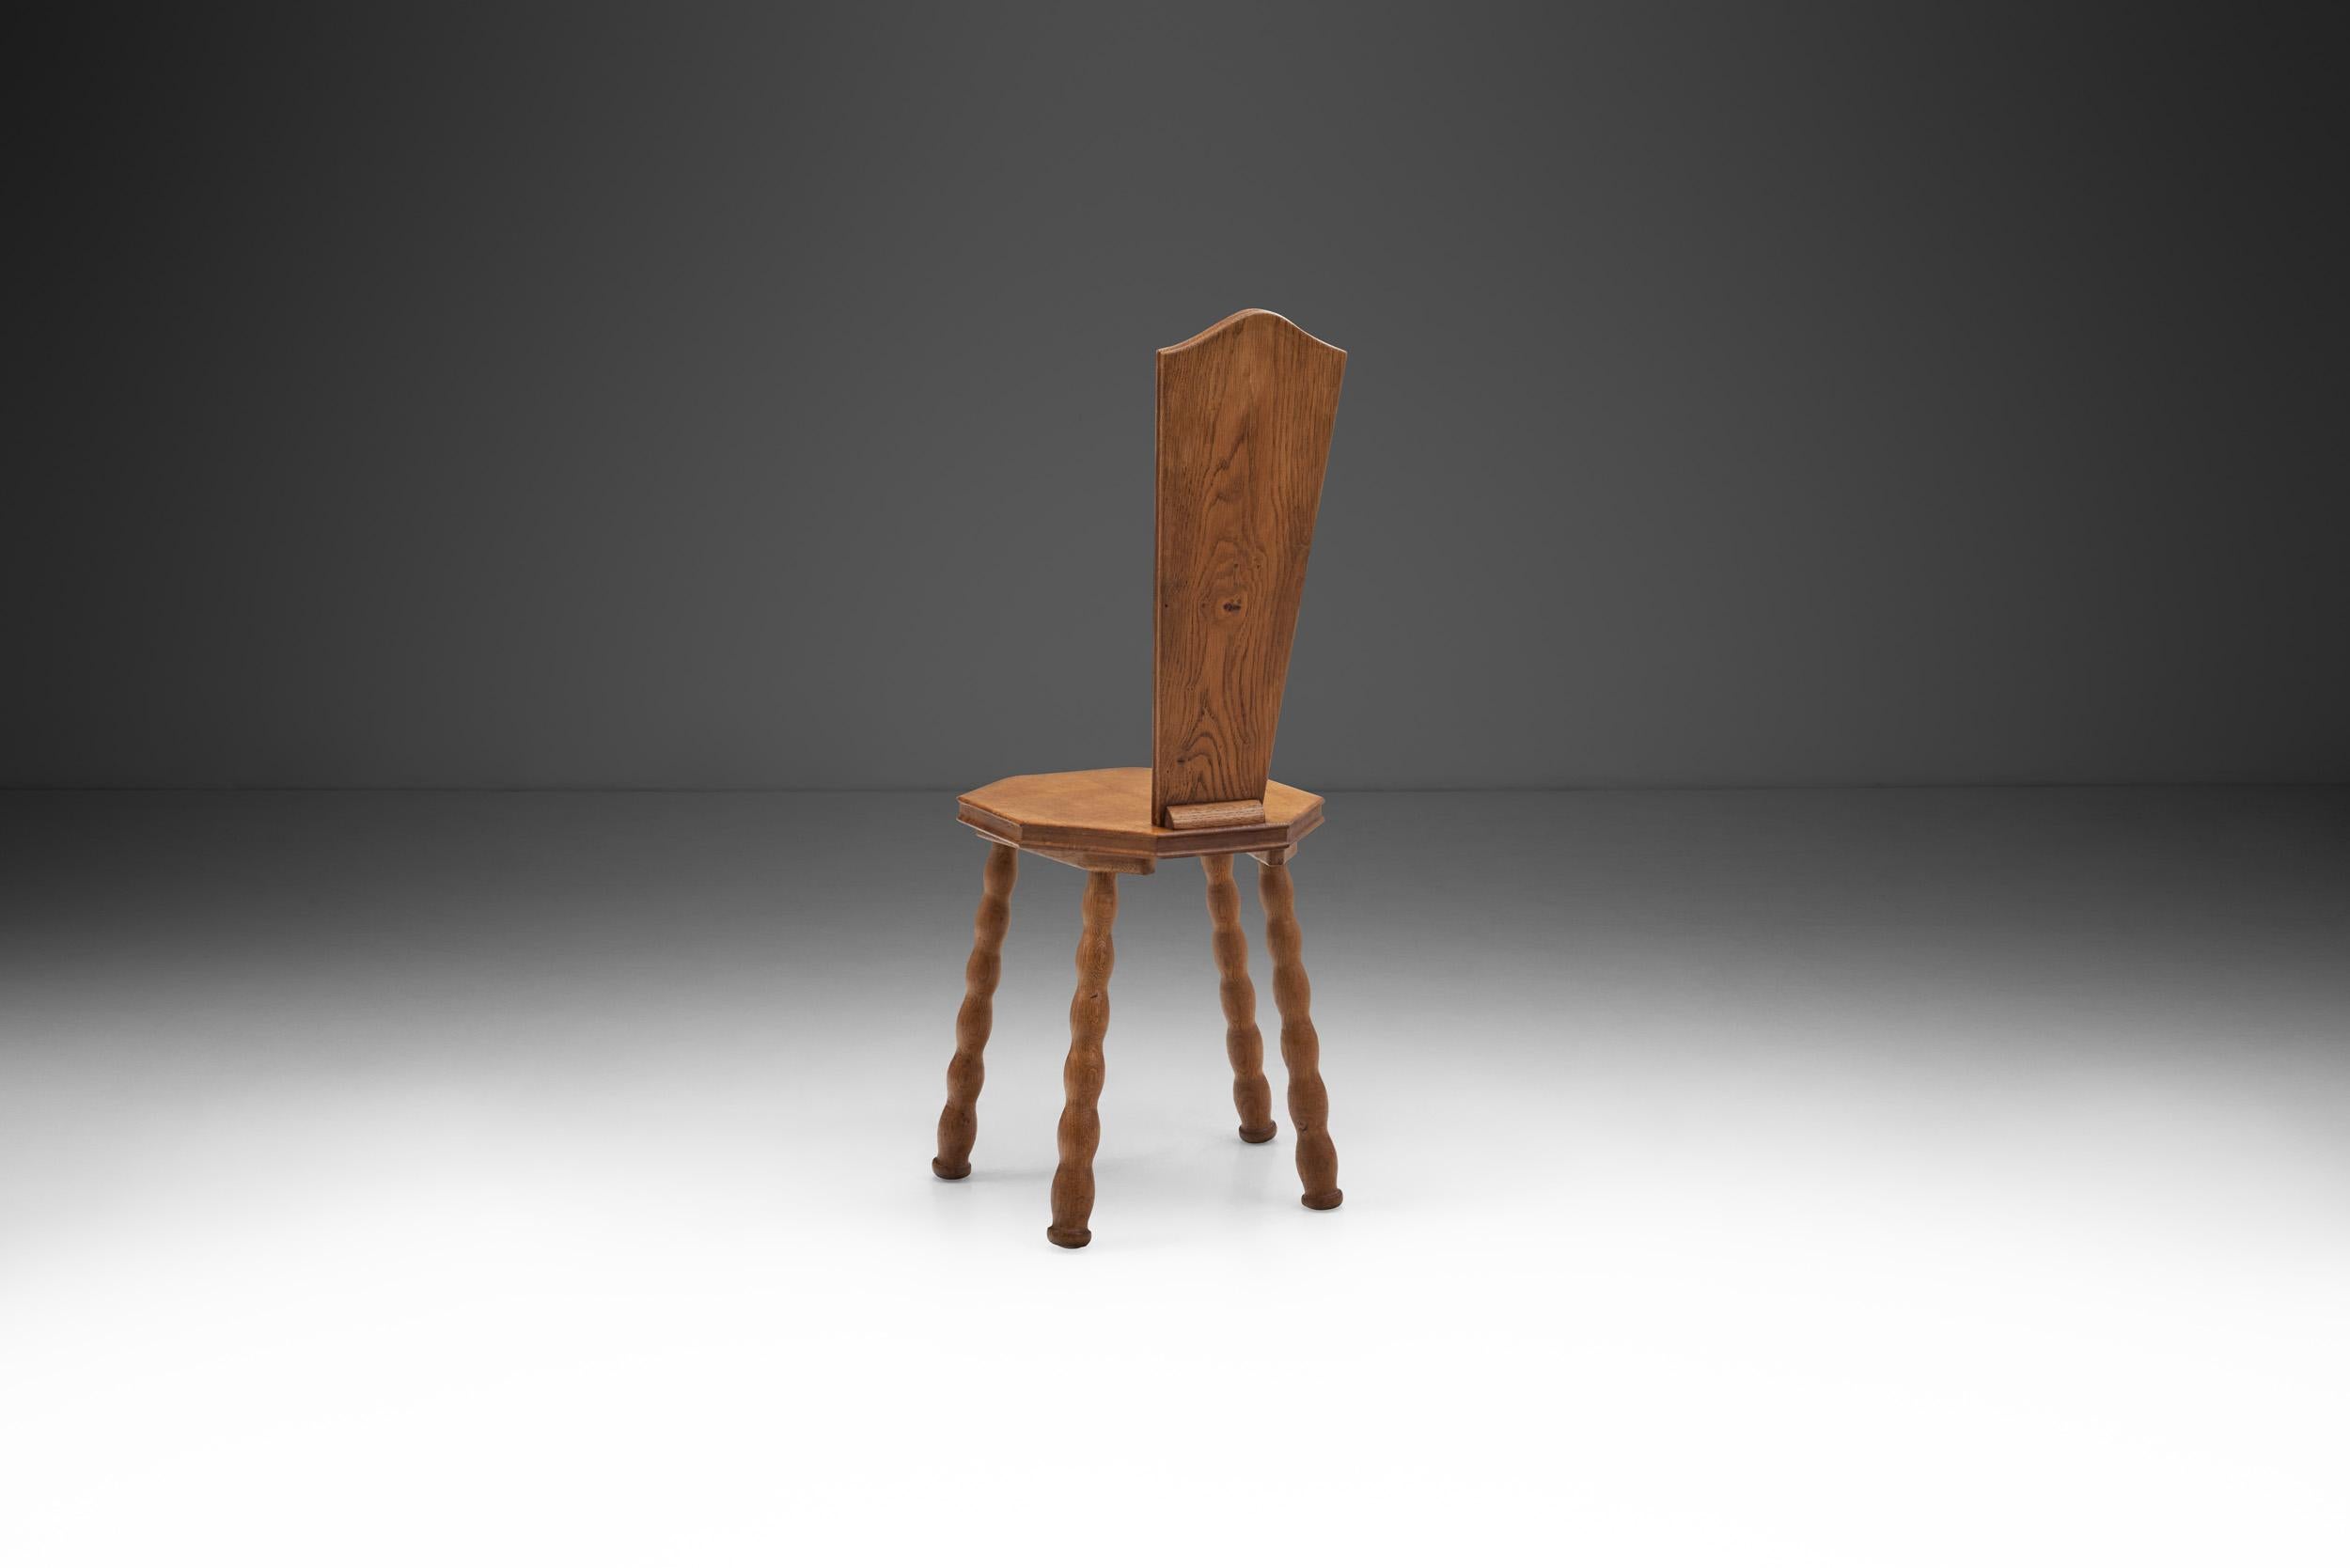 Wood Set of 4 Sculptural Patinated Oak Spinning Chairs, Europe ca early 20th century For Sale